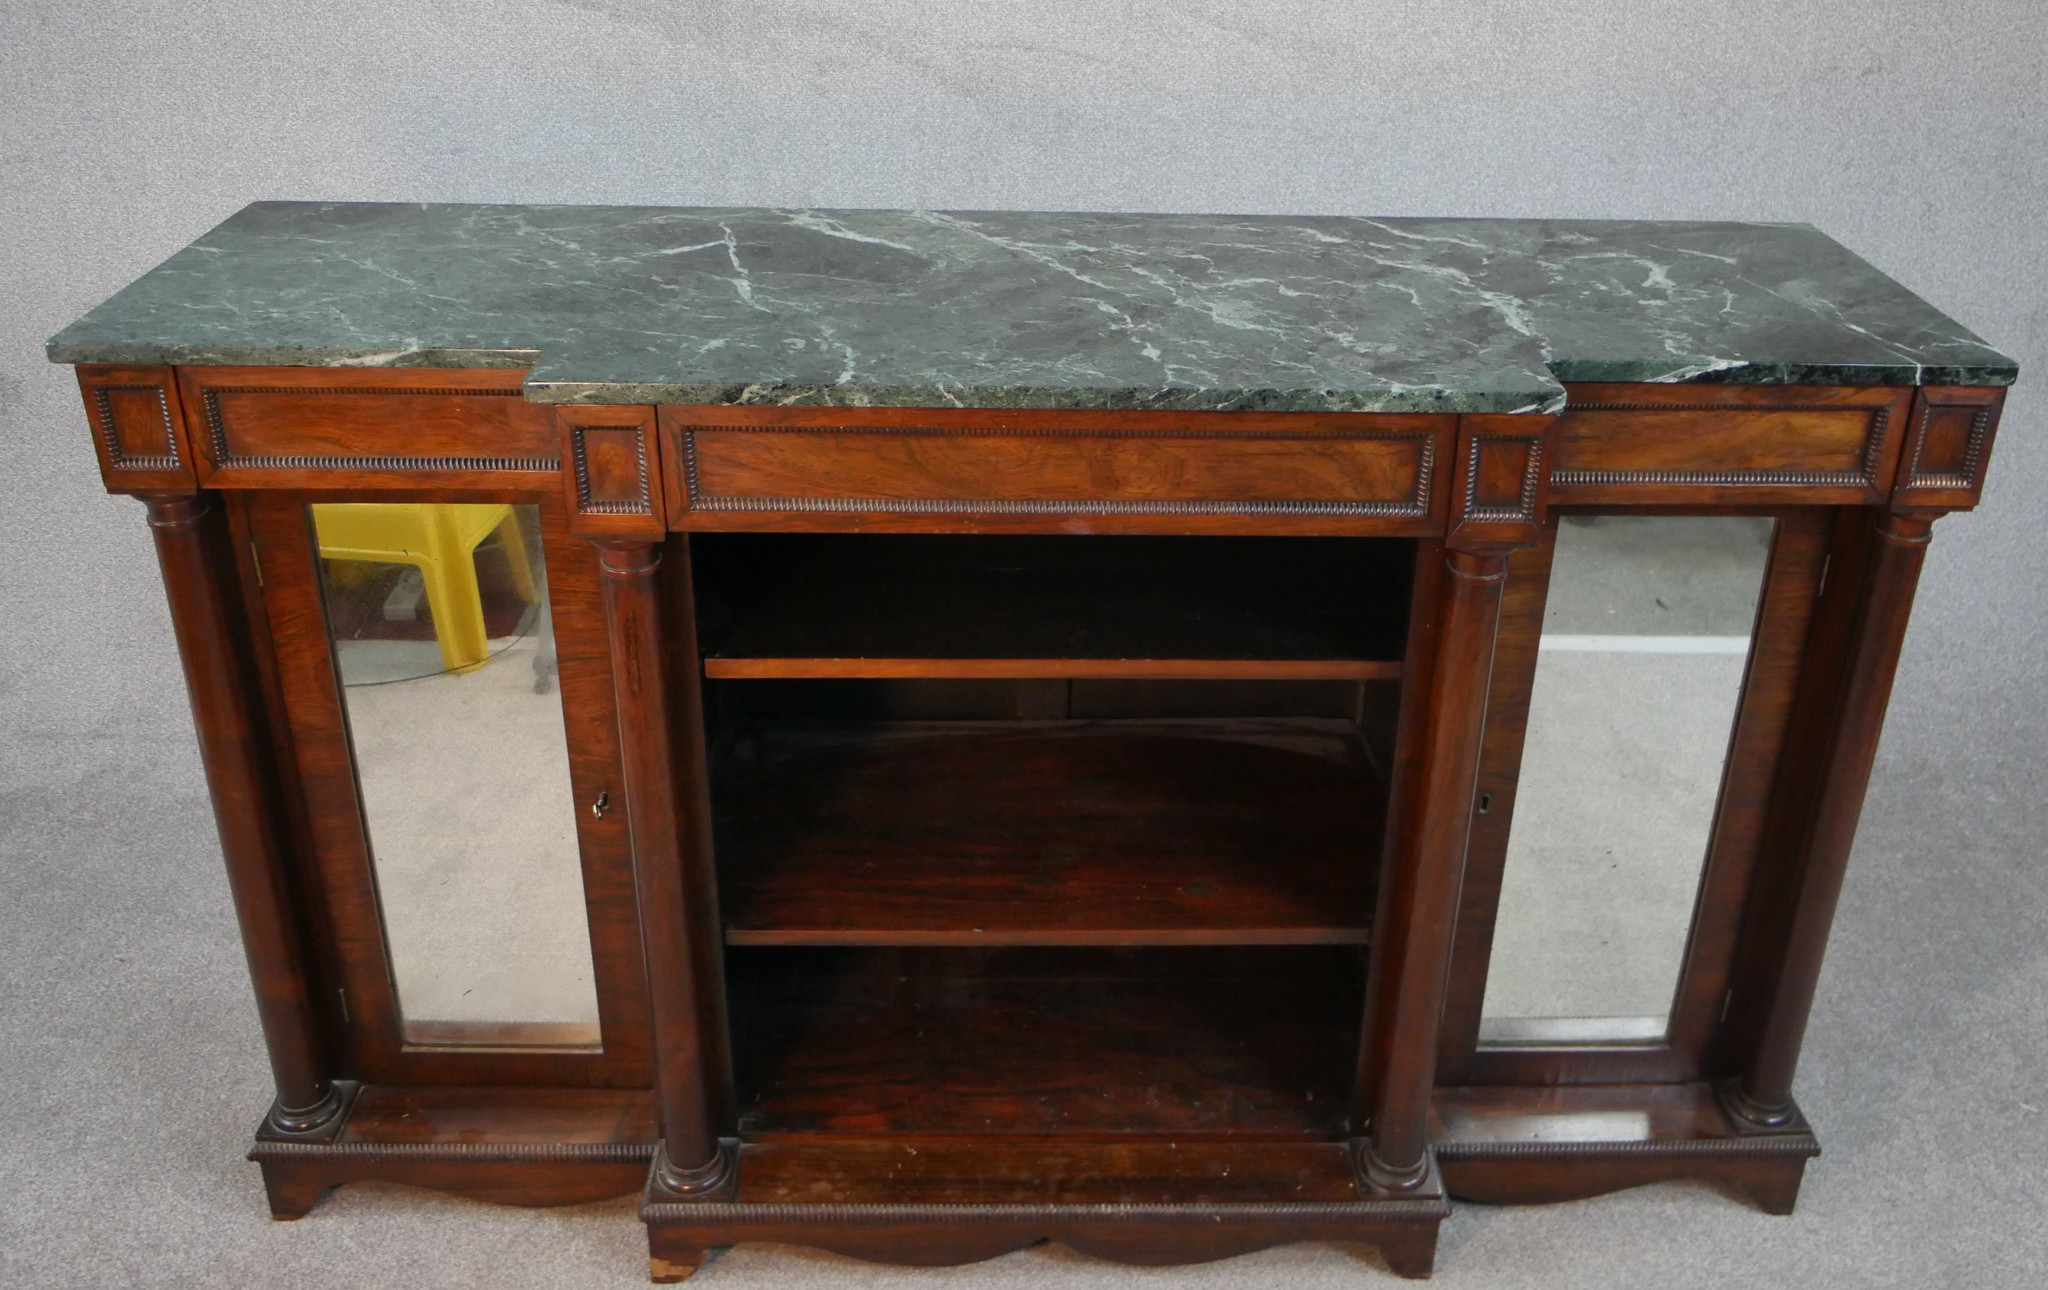 A William IV walnut breakfront sideboard, with a green marble top supported by four columns, with - Image 2 of 7